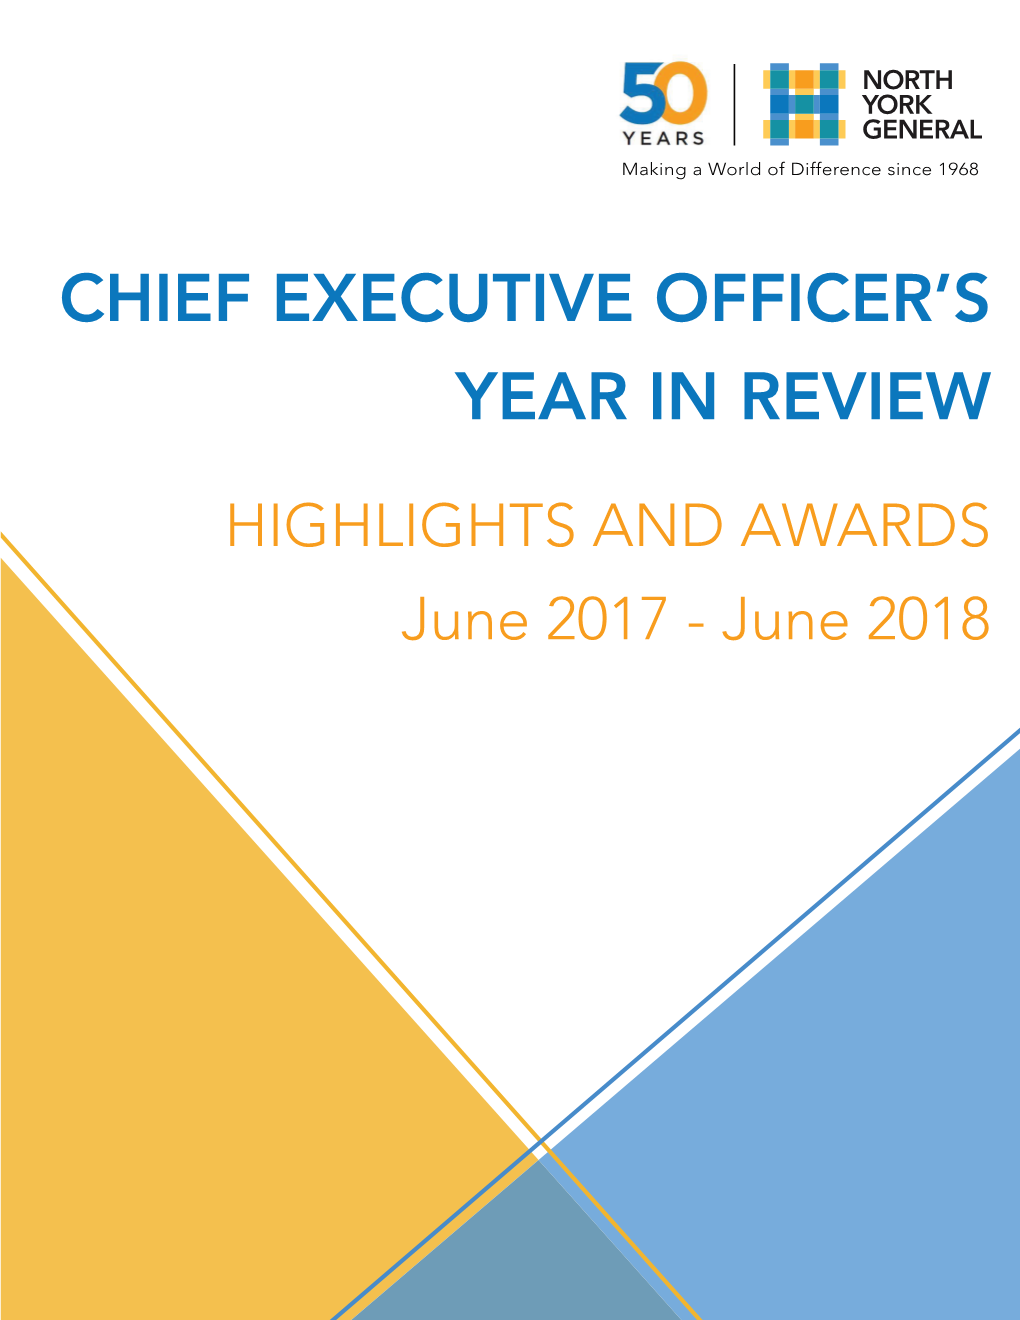 Chief Executive Officer's Year in Review